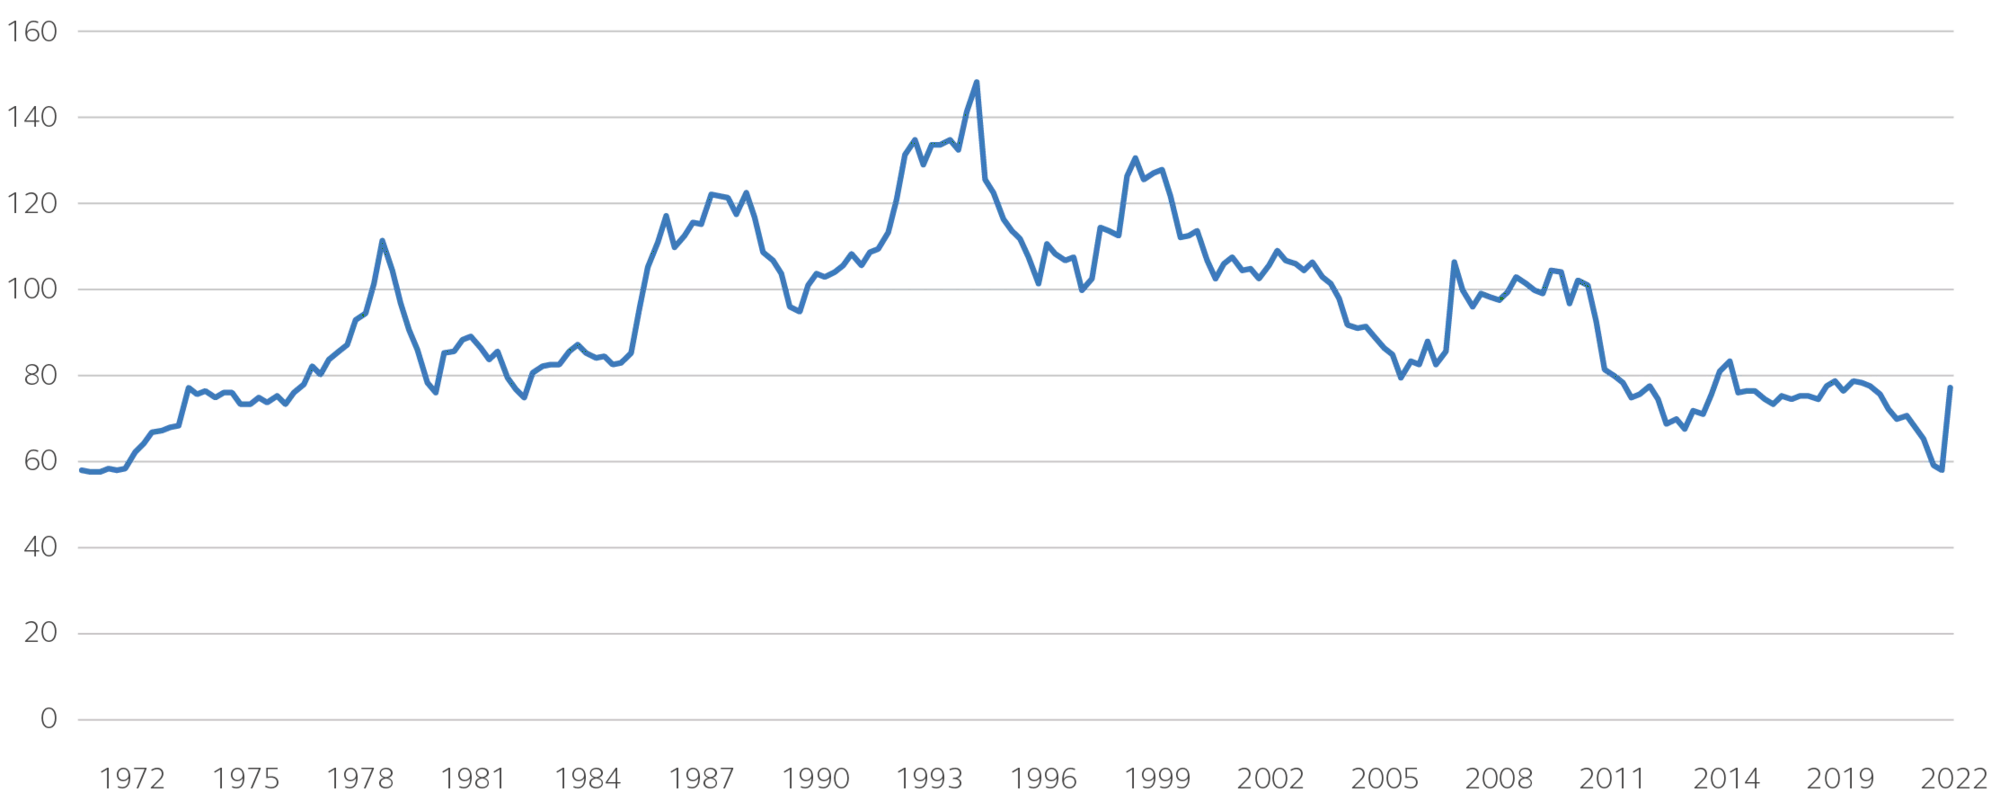 Line graph showing Bank of Japan effective exchange rates 1972-2022